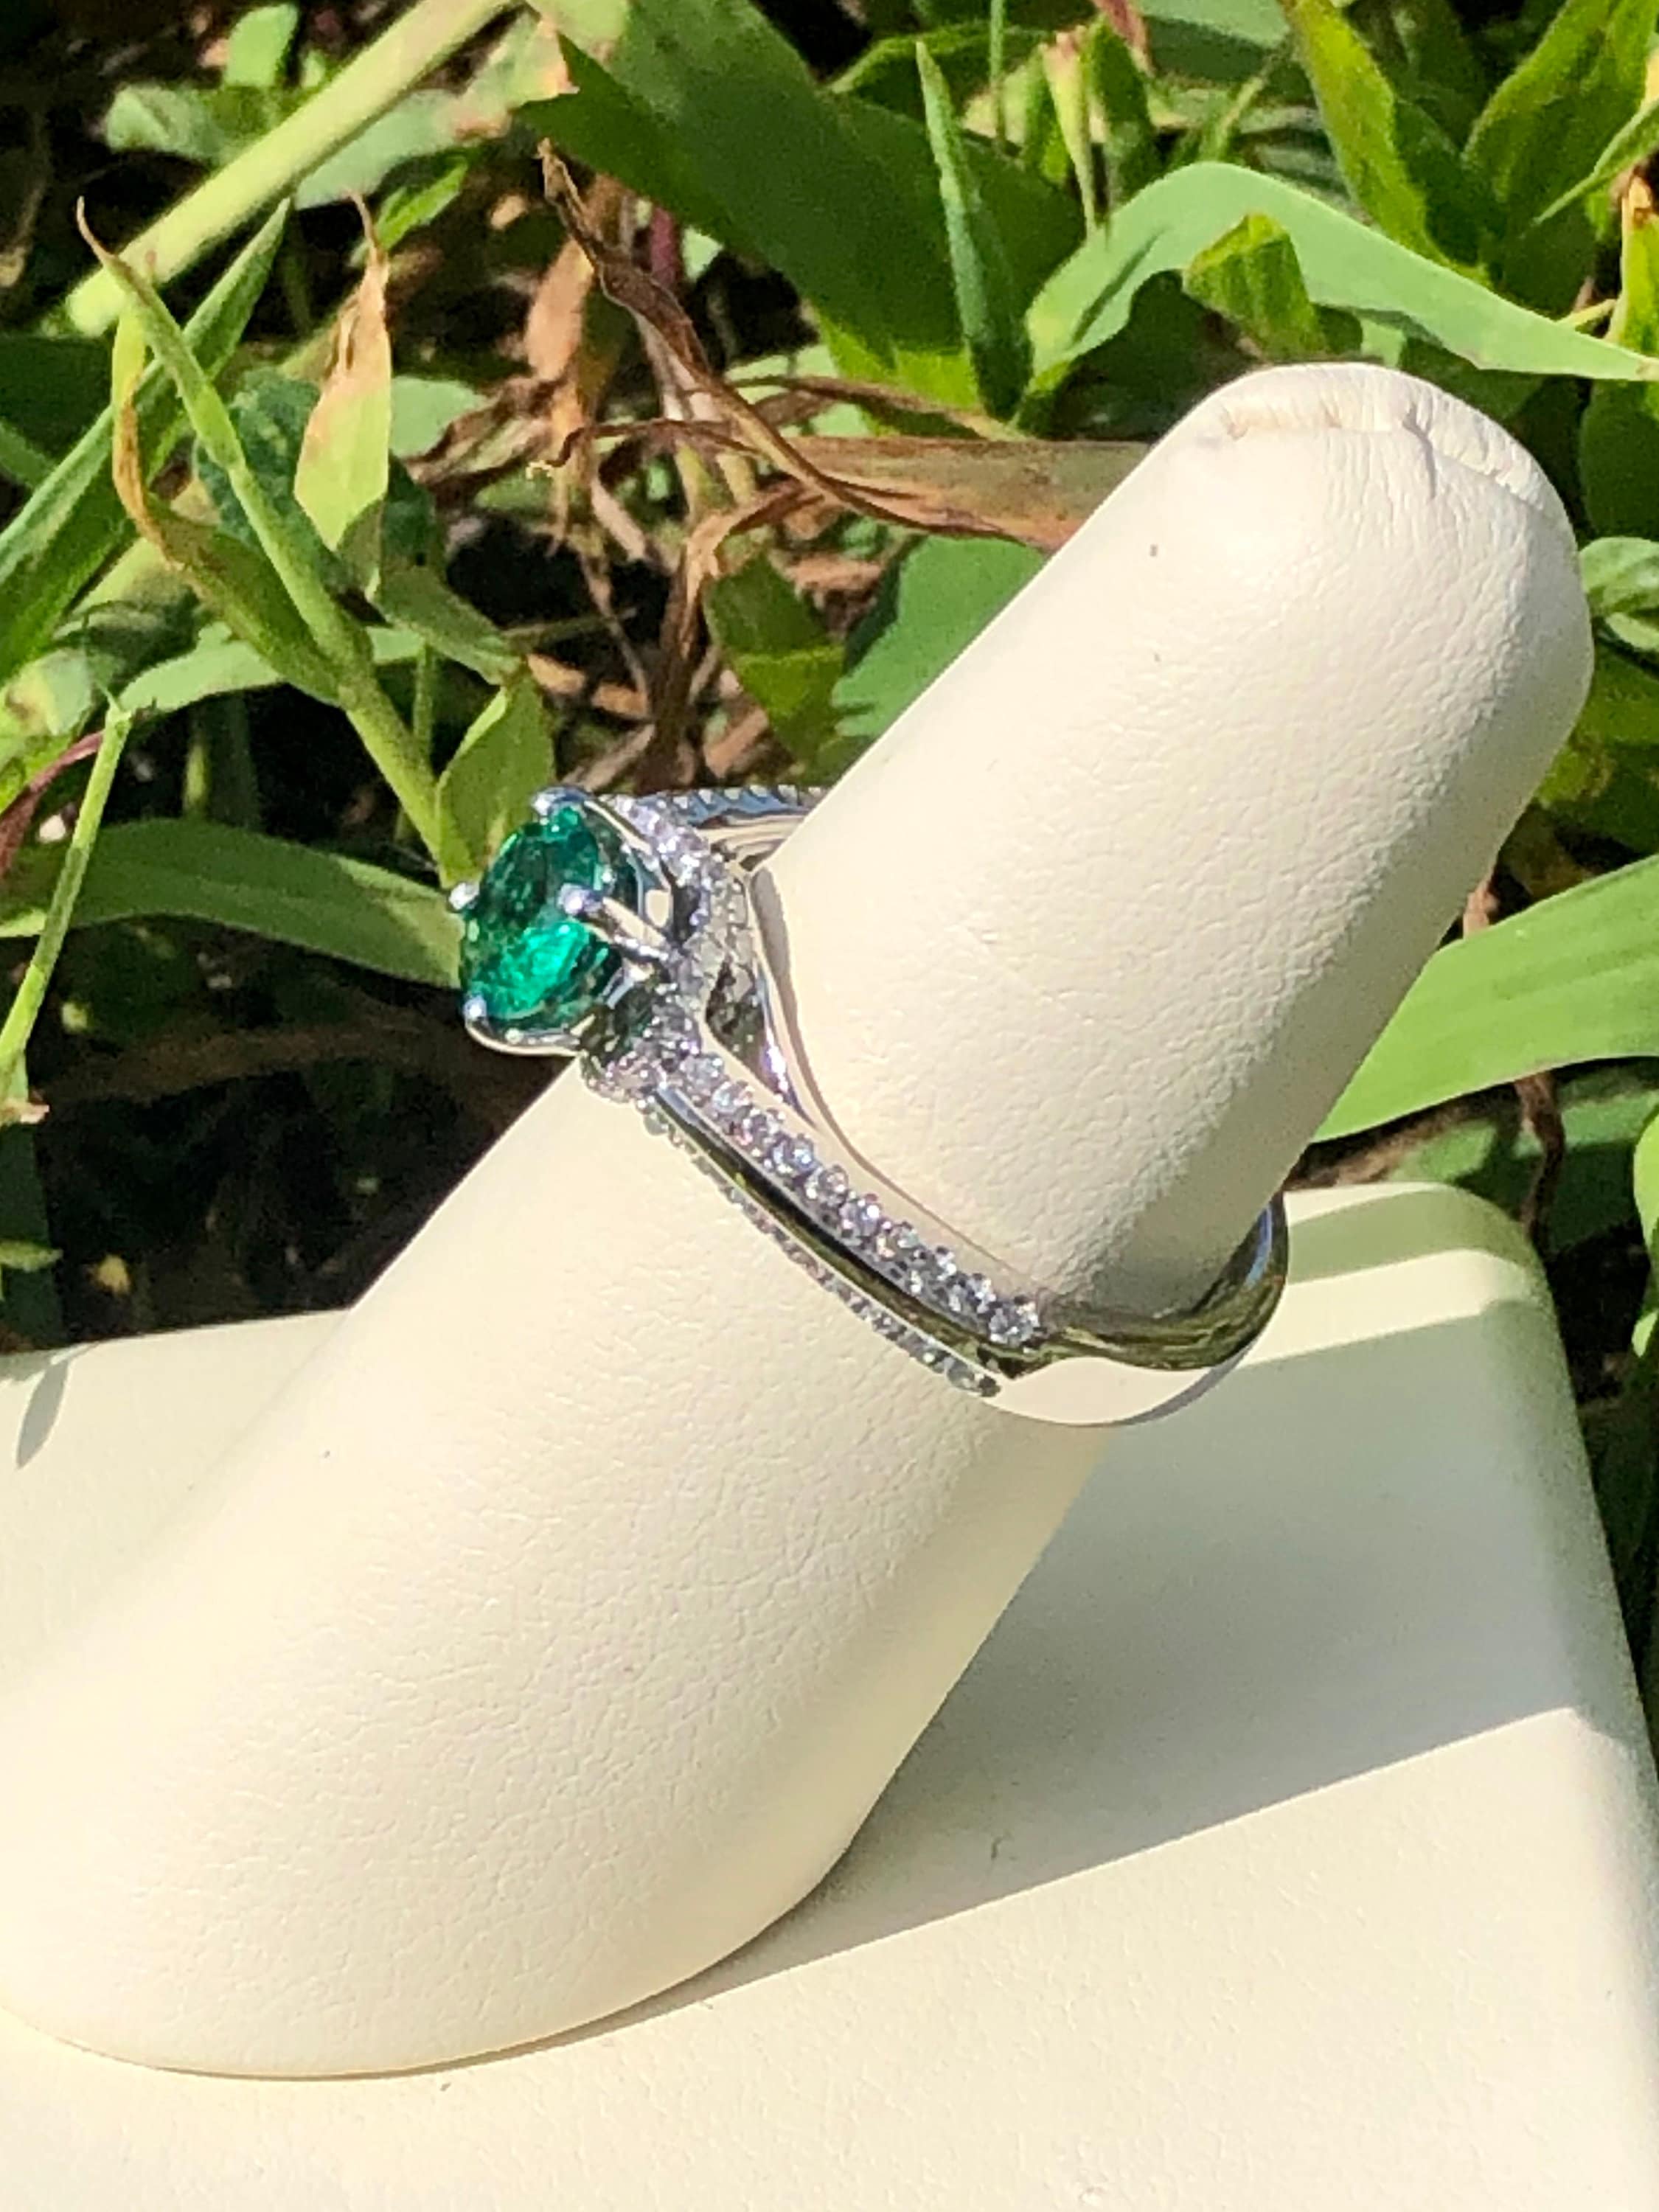 Product Image for 14K White Gold .71CT Emerald & .33CT Diamond Ring